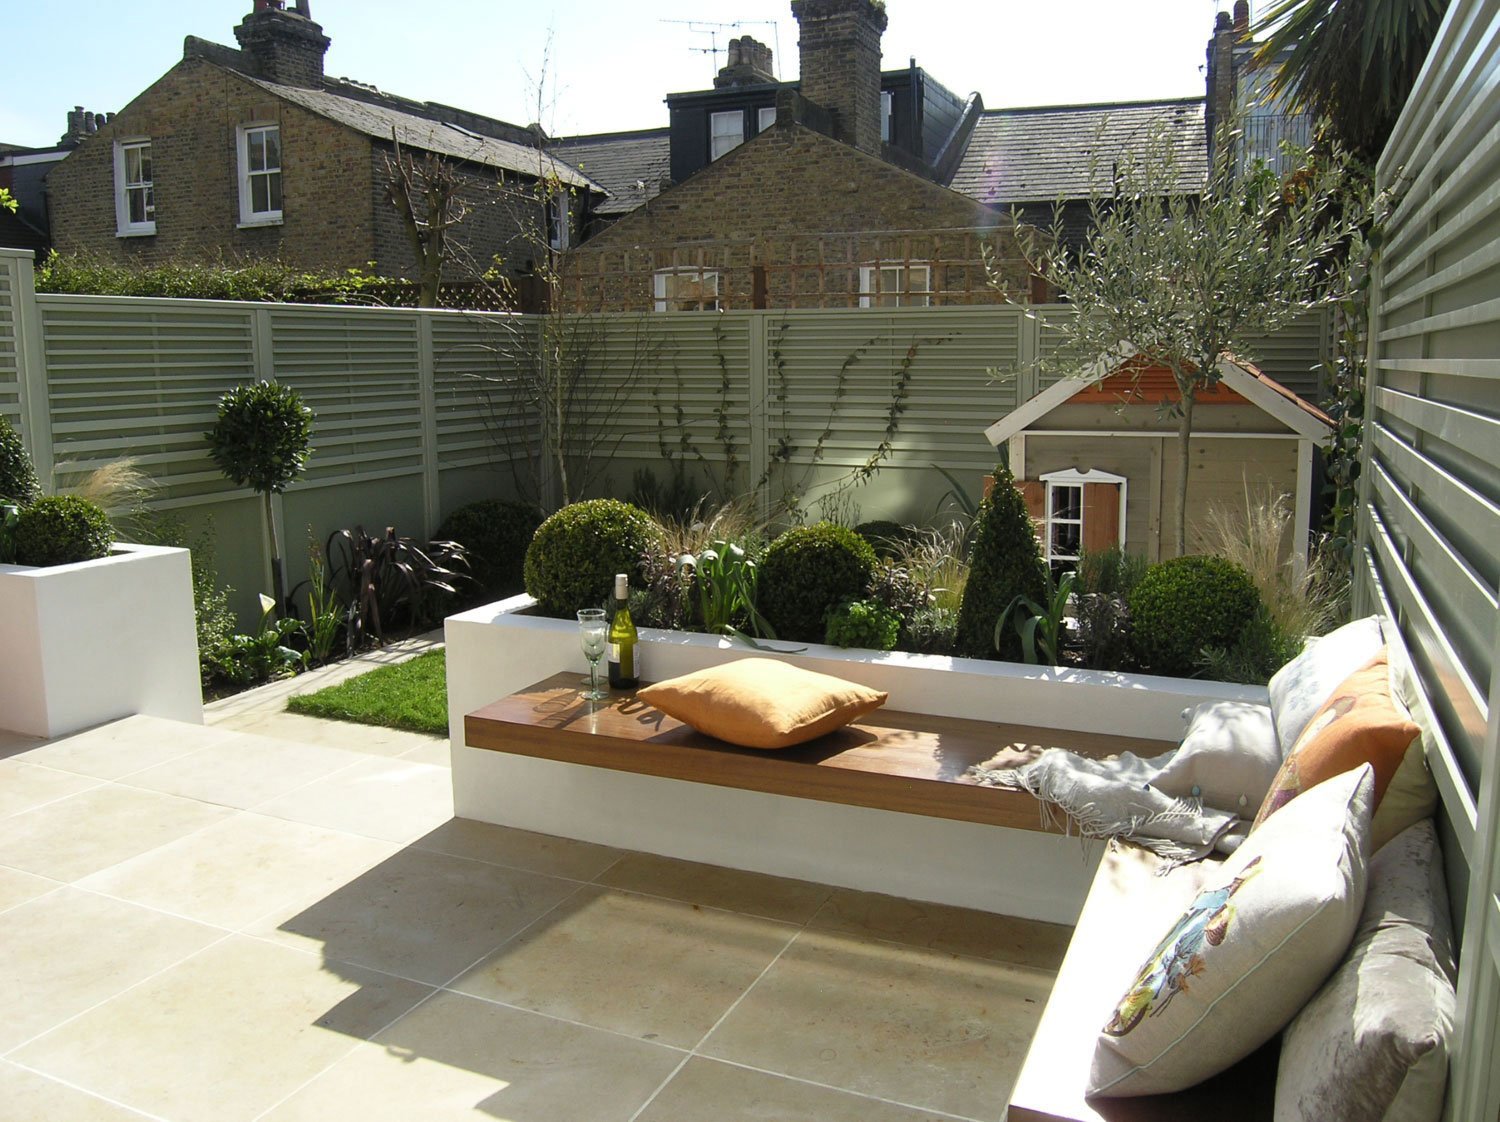  Square garden design in Clapham for family garden landscaping project with limestone patio and low maintenance lawn. 